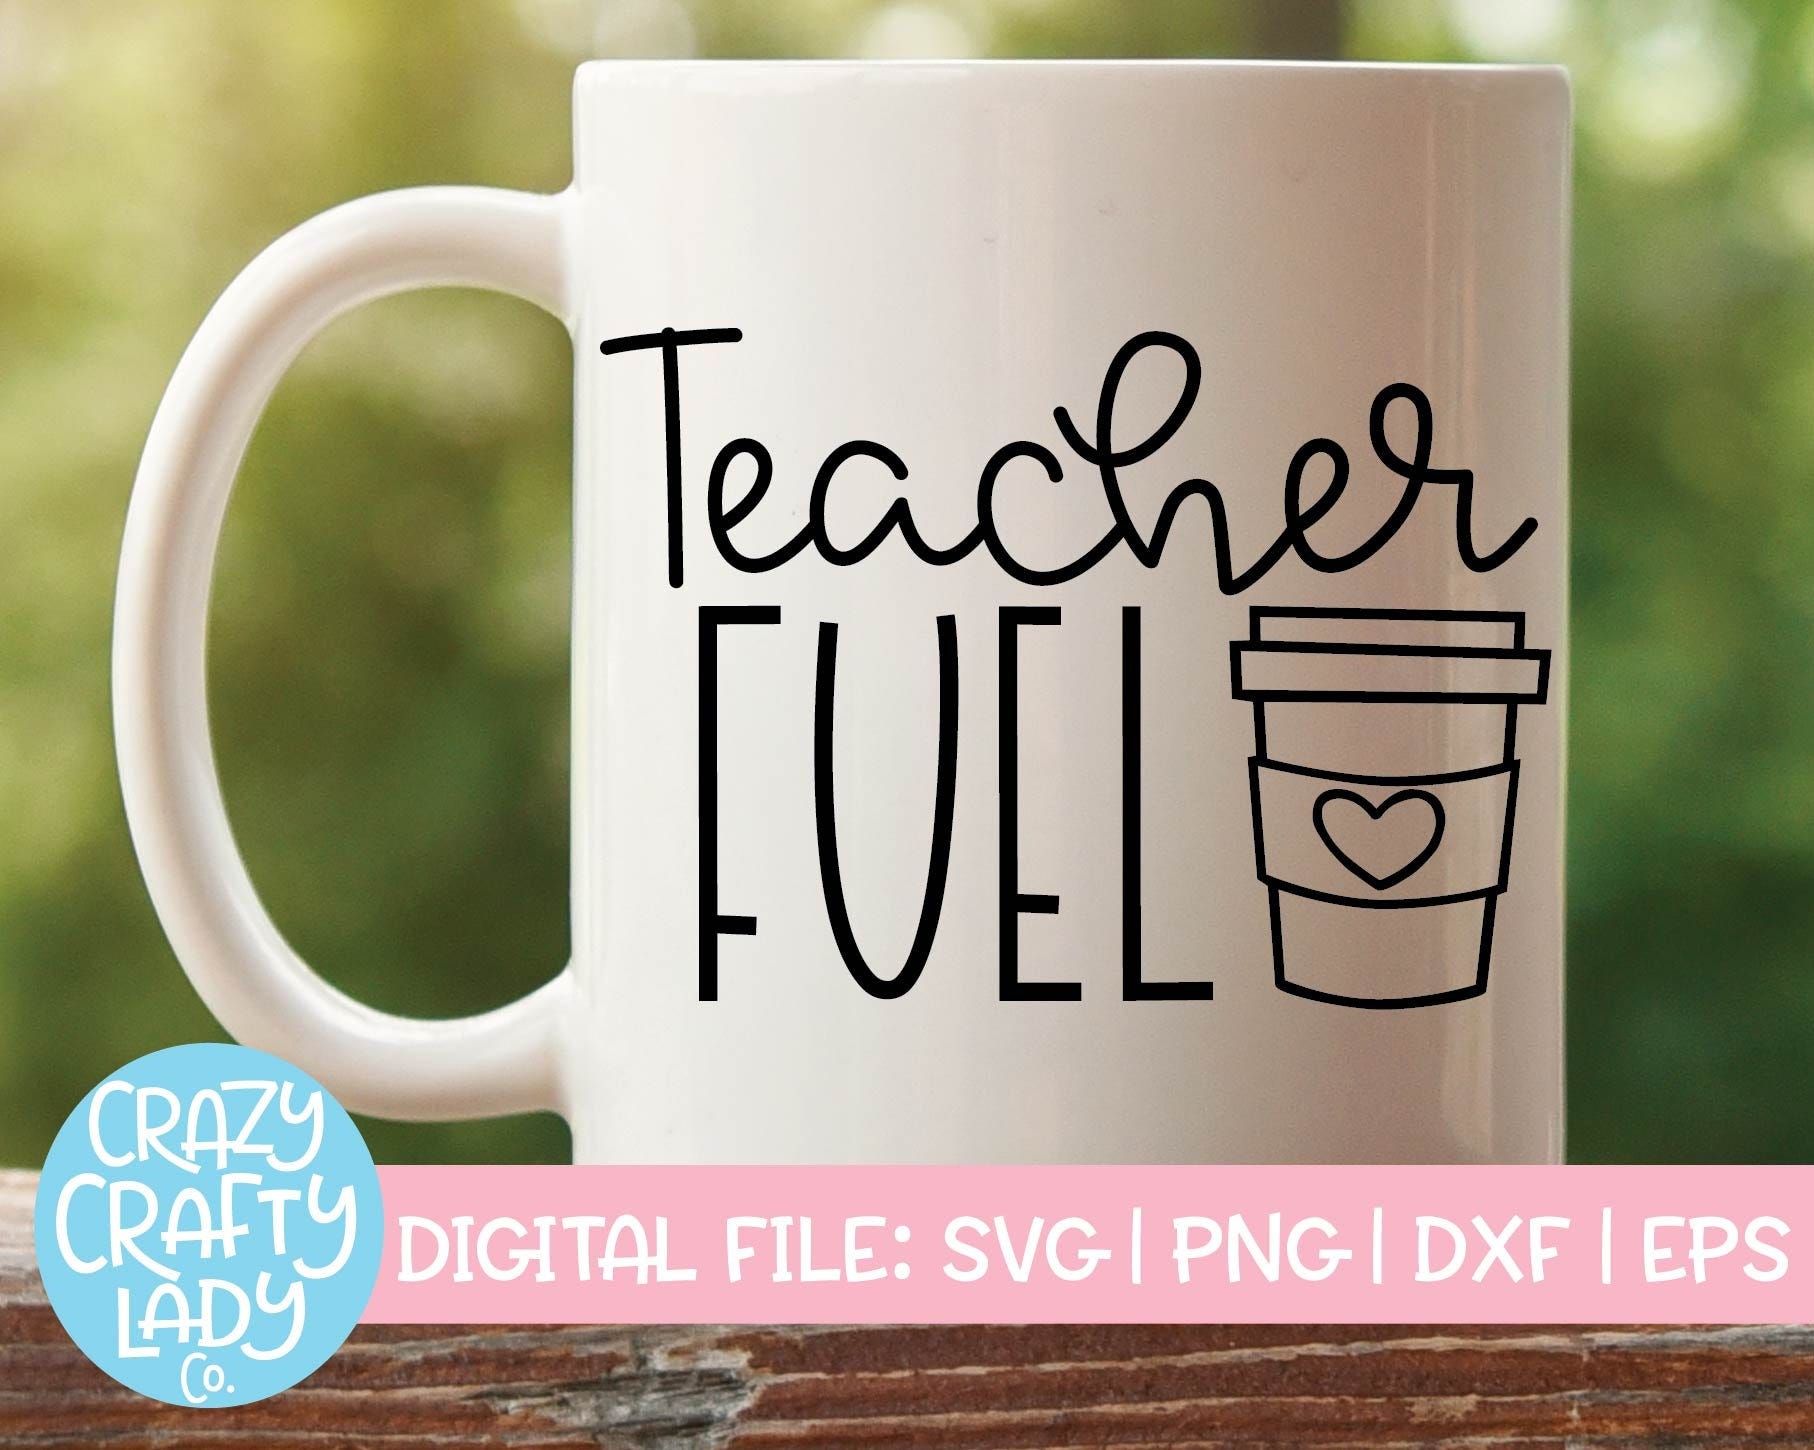 Teacher Fuel SVG, Back to School Cut File, Coffee Mug Saying, Appreciation Design, Funny Caffeine Quote, dxf eps png, Silhouette or Cricut